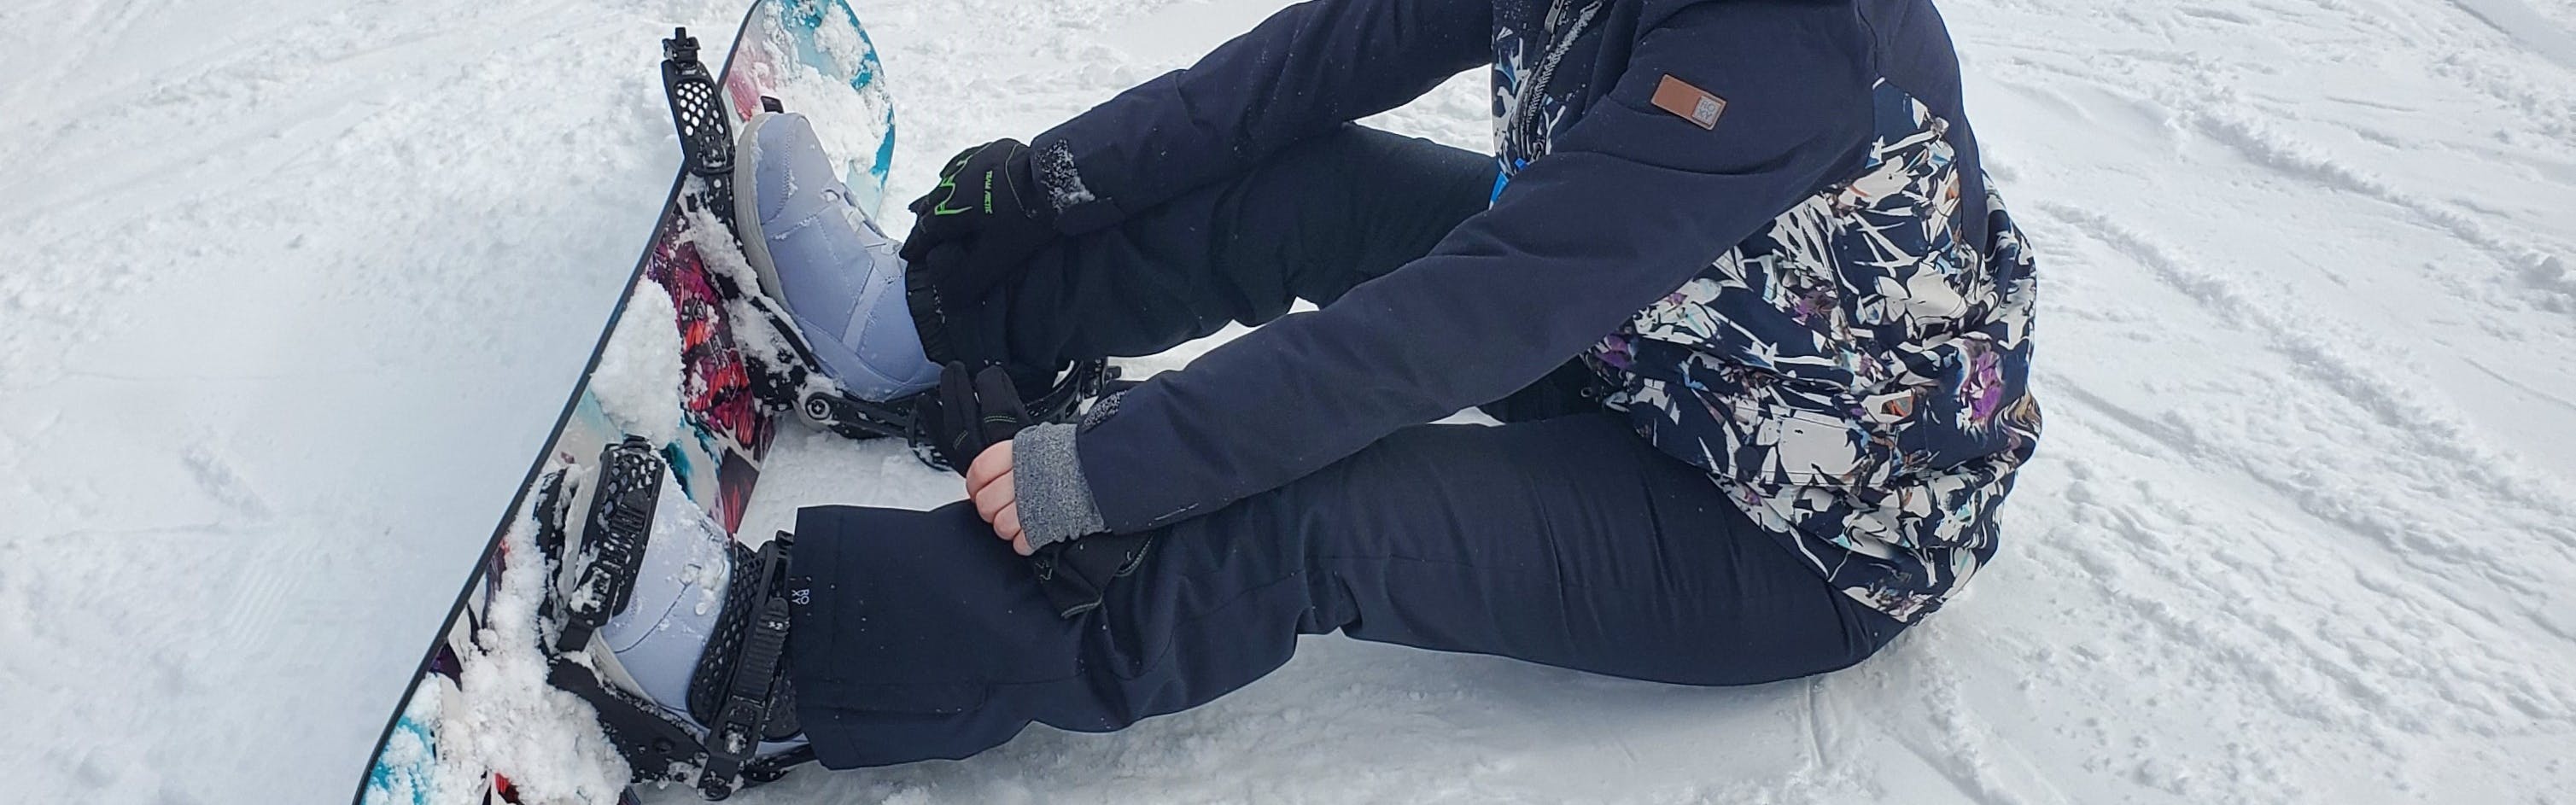 A snowboarder sitting in the snow in the Roxy Women's Backyard Pants.